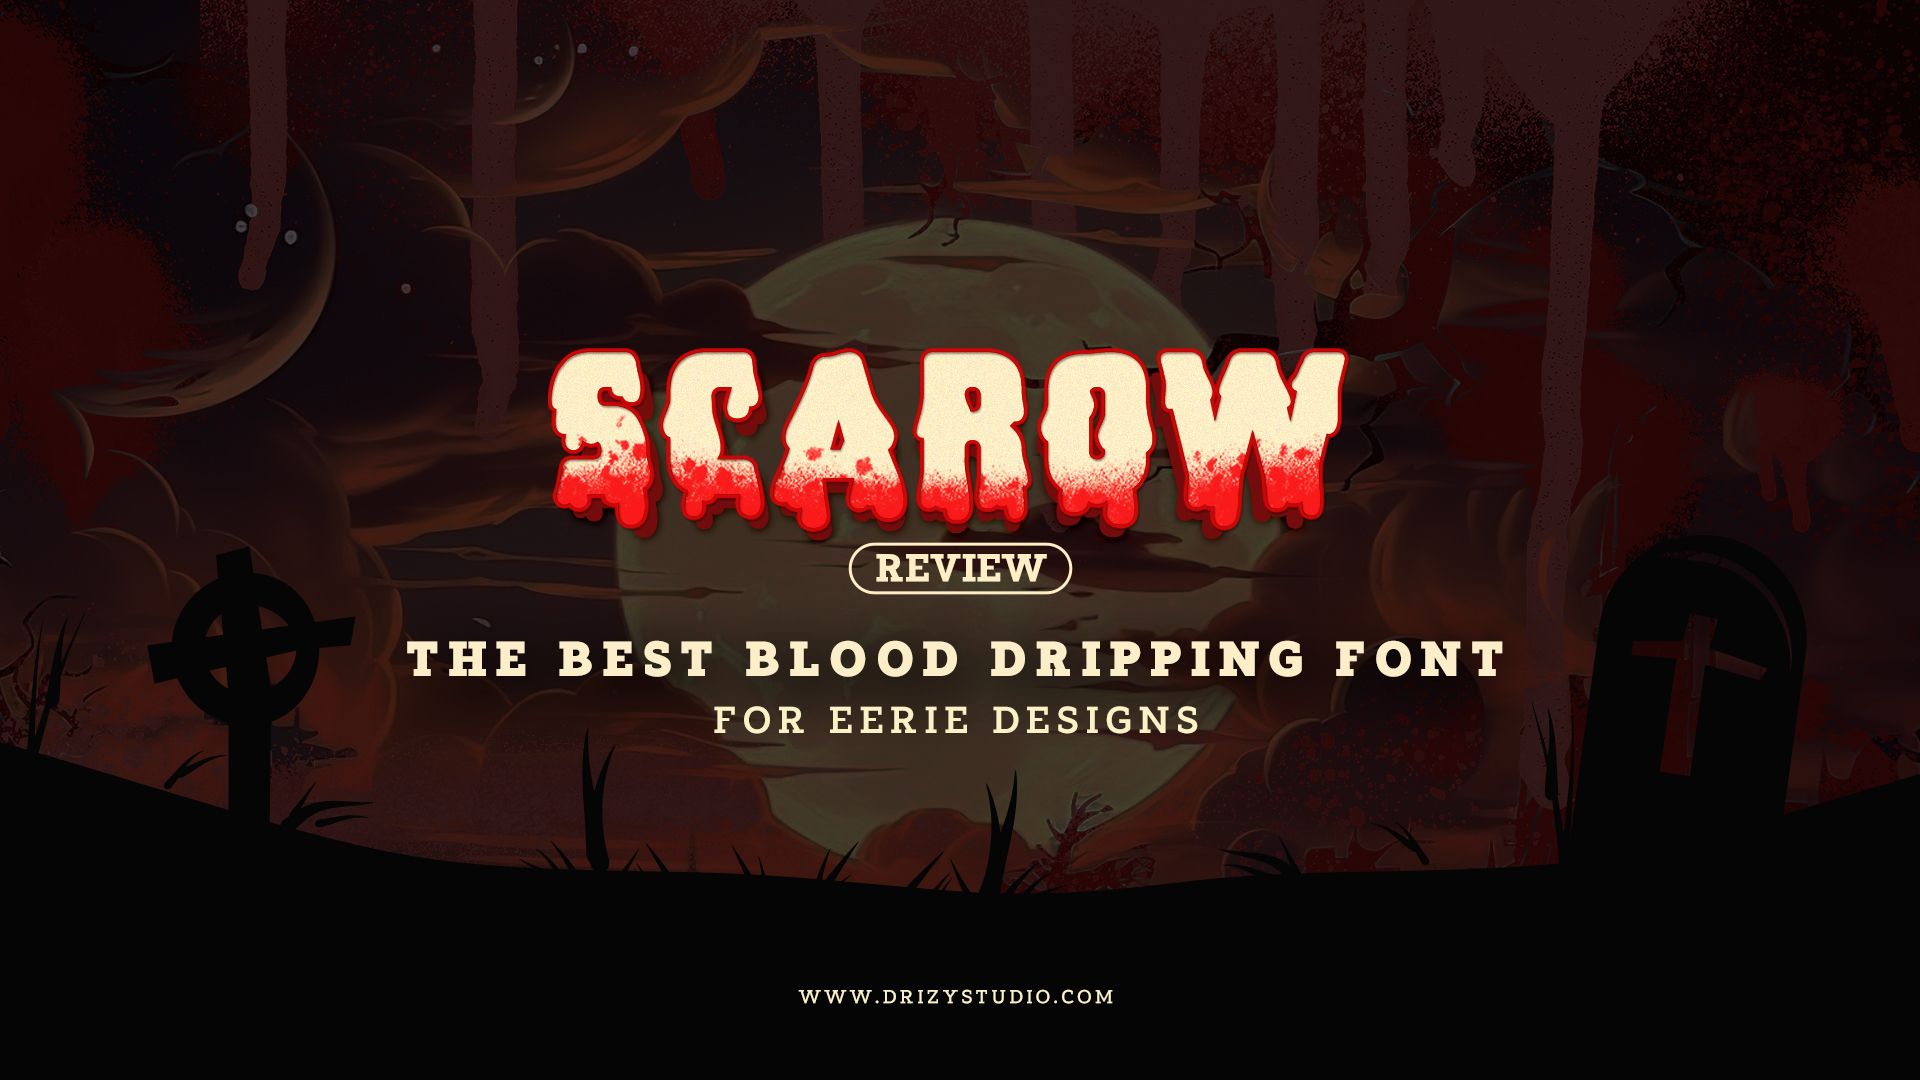 Scarow Review The Best Blood Dripping Font for Eerie Designs